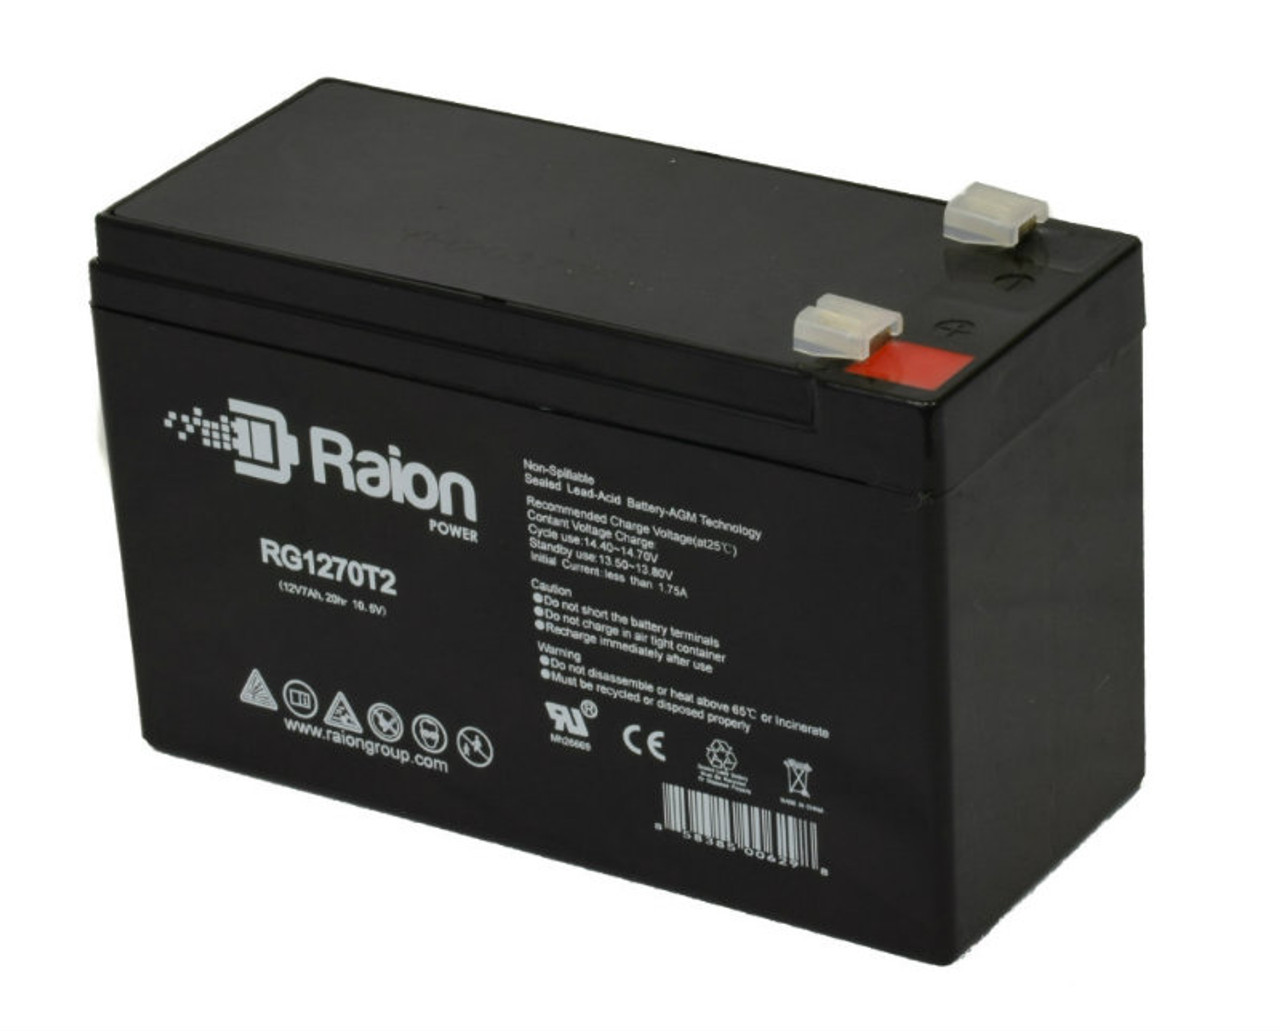 Raion Power Replacement 12V 7Ah Battery for Razor 15130662 Pocket Mod Bella - 1 Pack